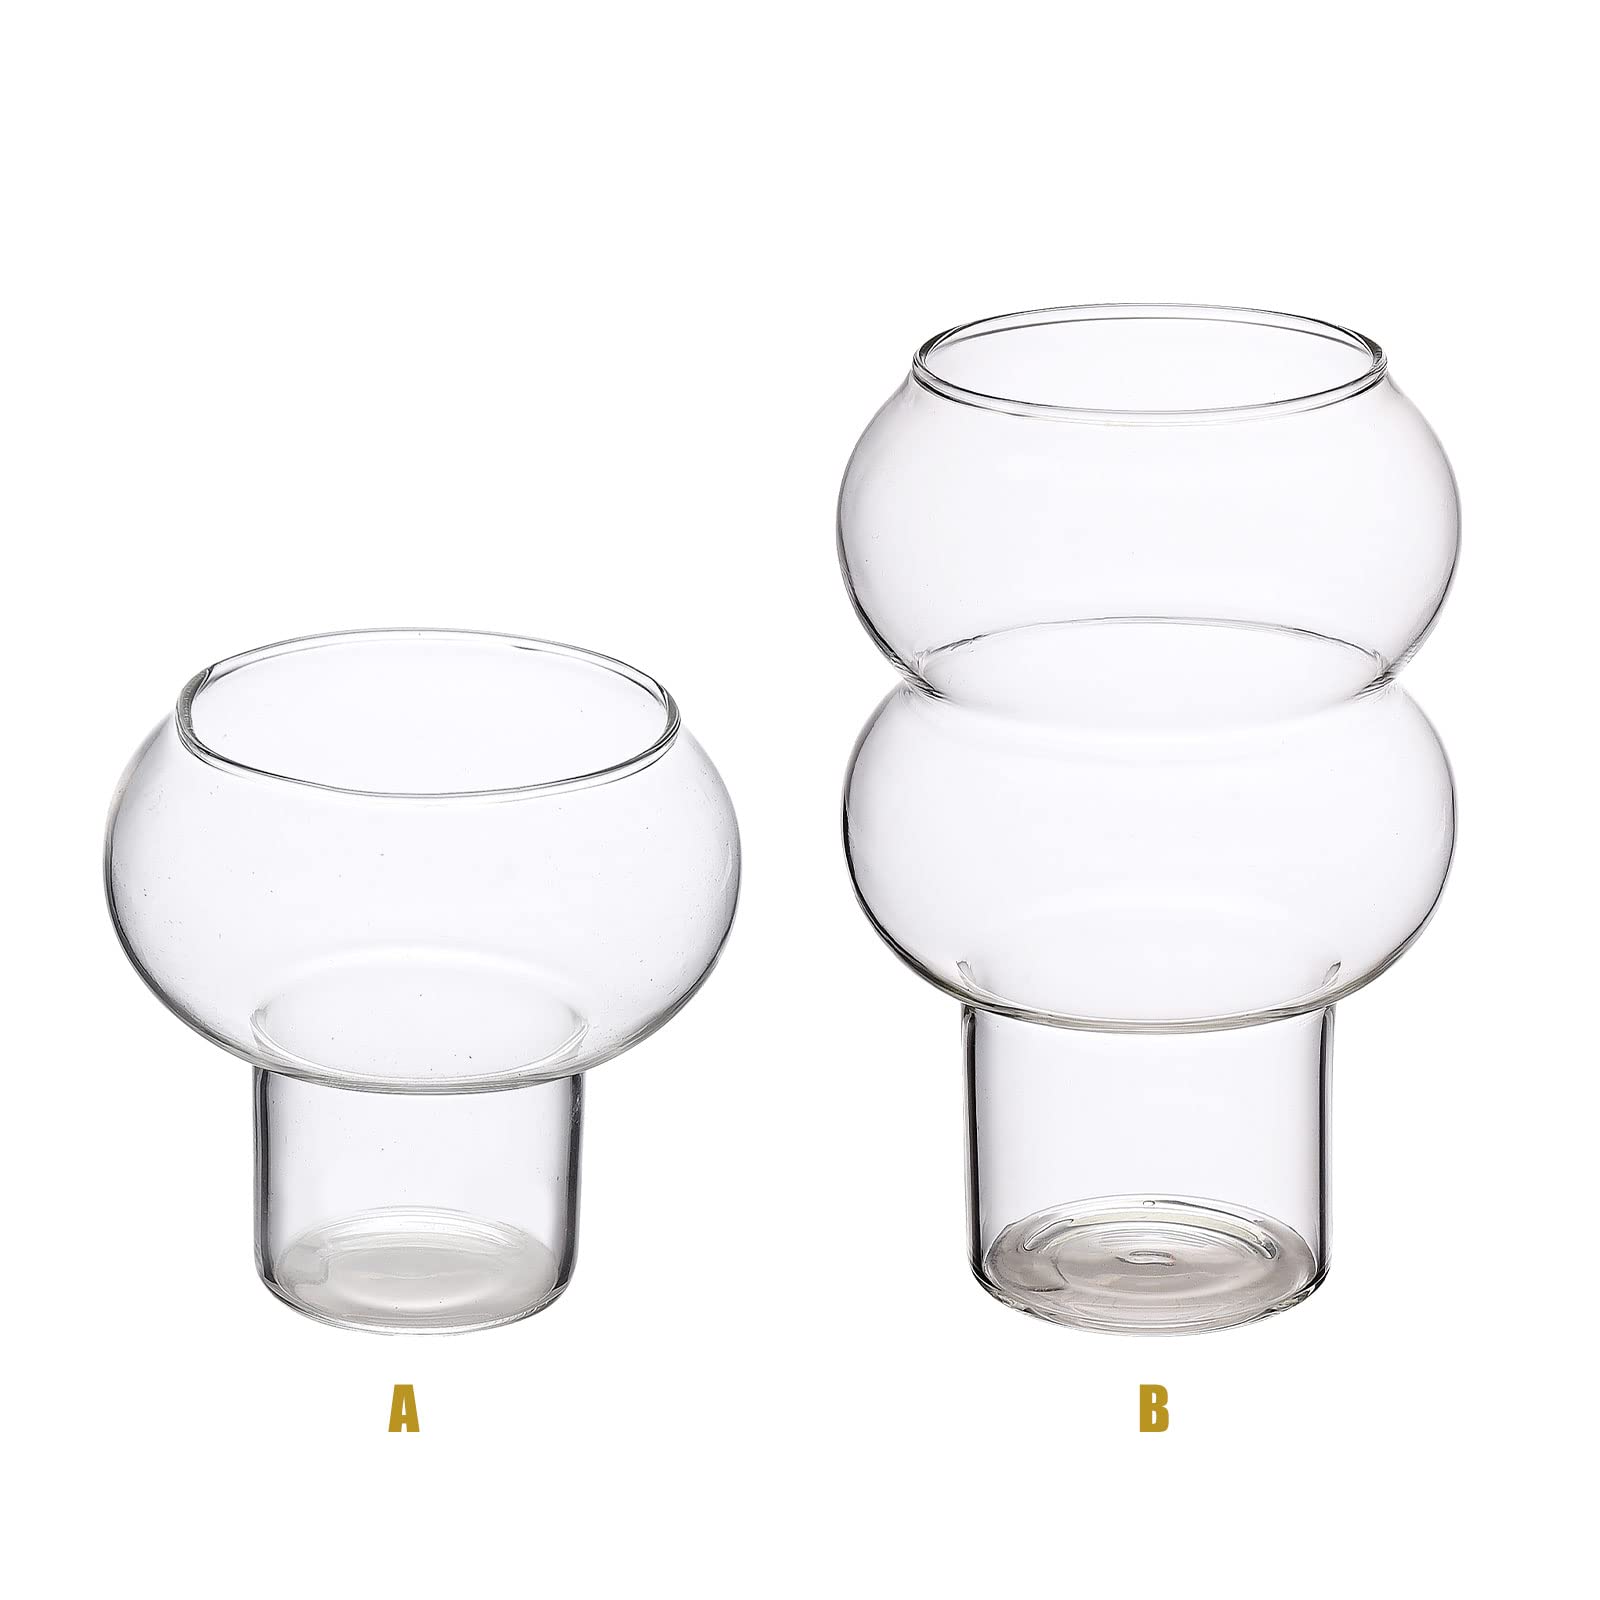 MISNODE 2 Pack Ribbed Drinking Large-Capacity Glasses Glass Cup Creative Glassware Heat-resistant Drinking Glasses Cocktail Glasses, Use for Tableware Flower Receptacle Dessert Cup